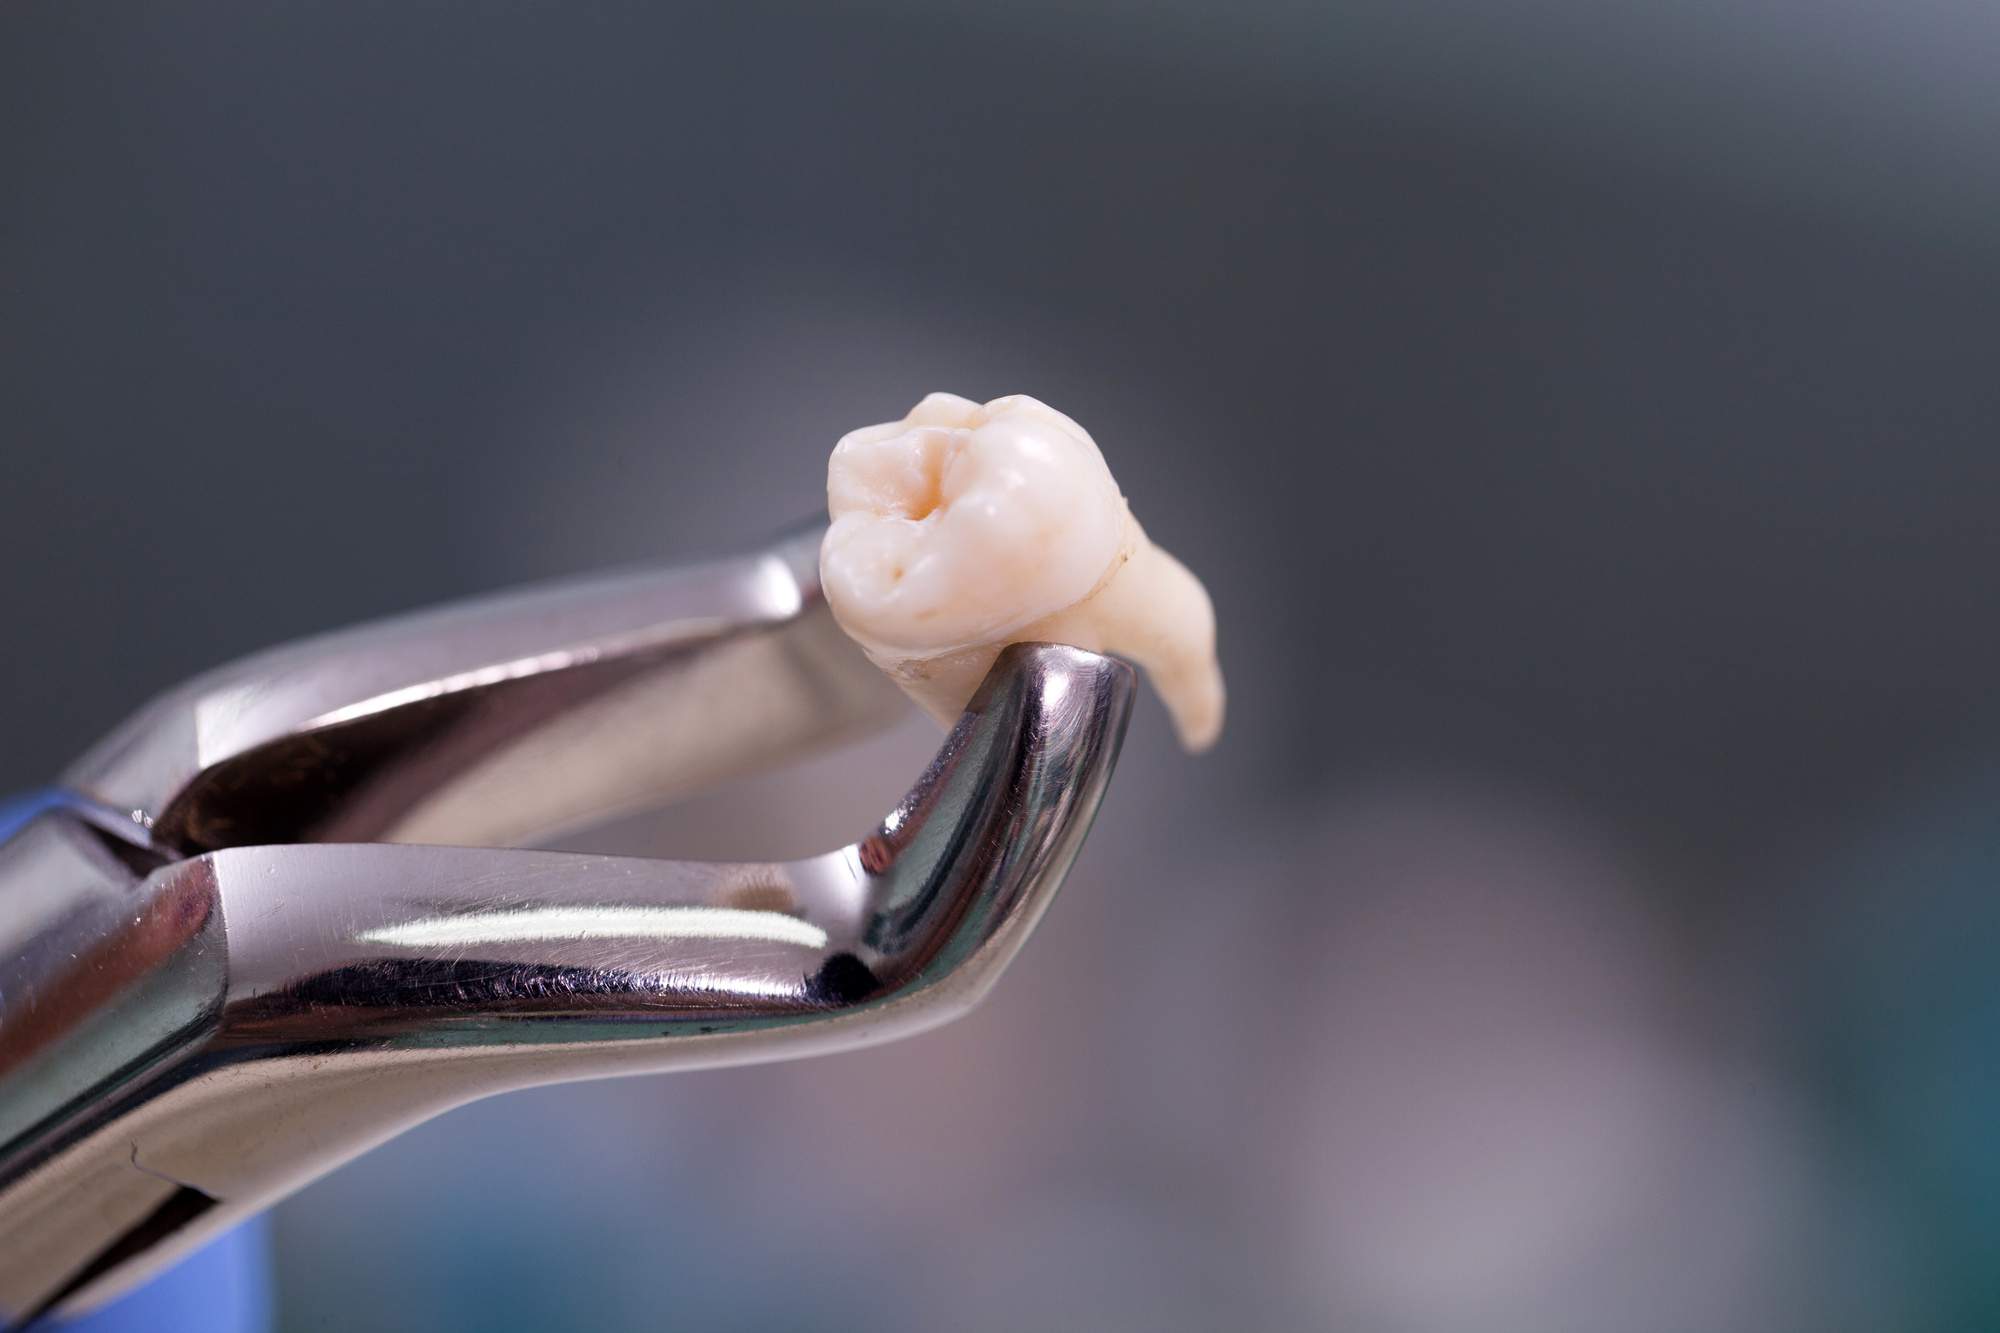 Common Causes of Tooth Loss in Adults, and How to Prevent It